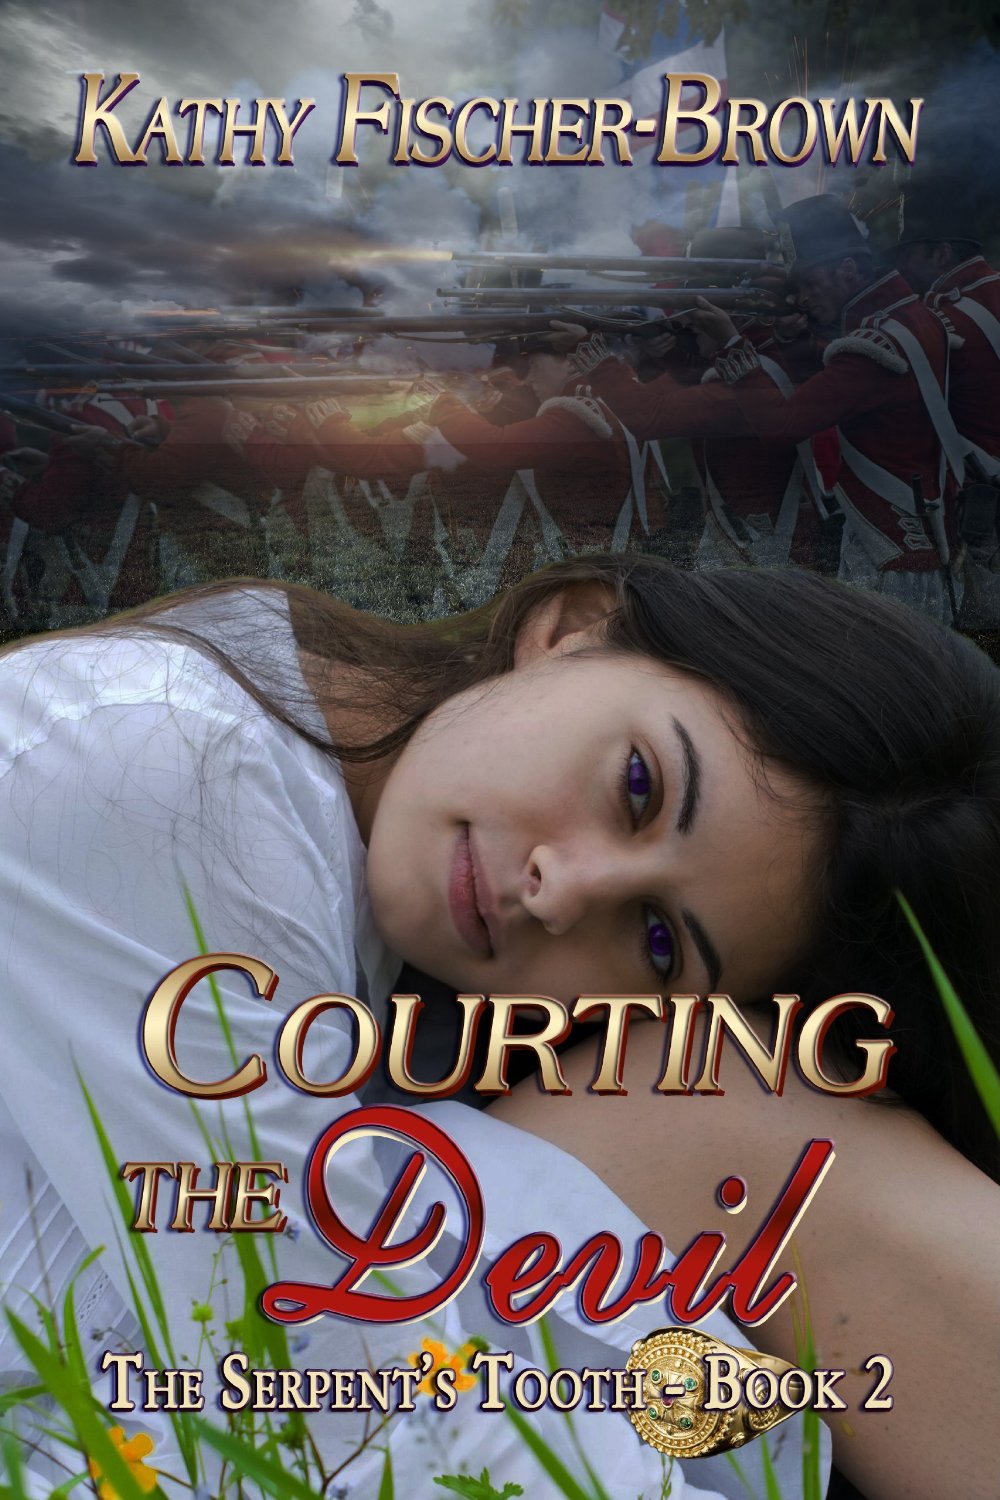 Courting the Devil by Kathy Fischer-Brown